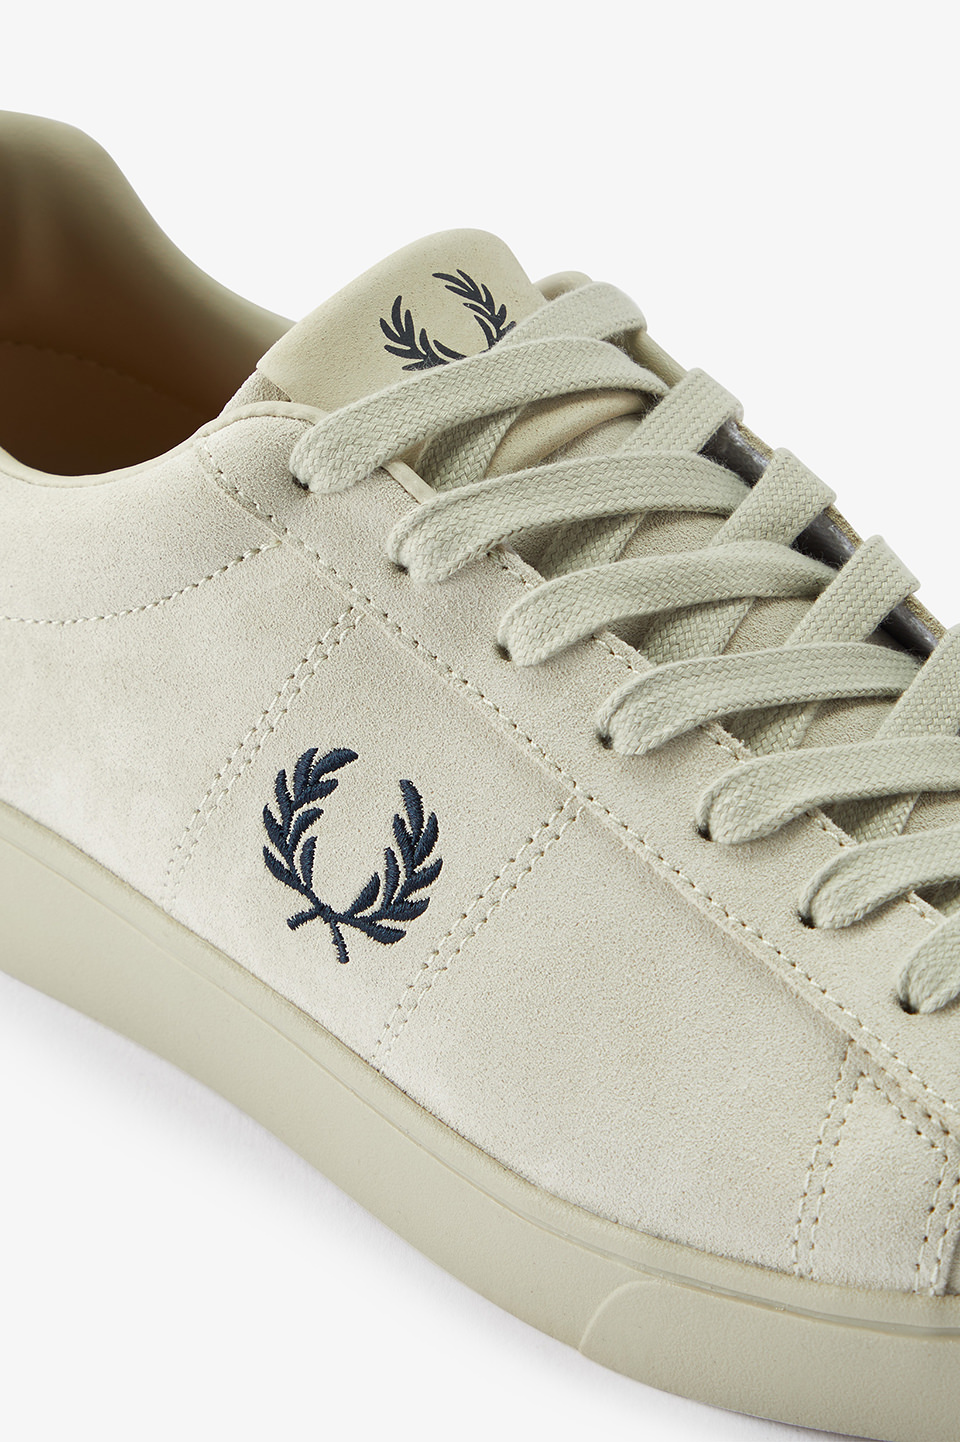 Spencer Suede / Nubuck(260 S57：LIGHT OYSTER / NAVY): | FRED PERRY